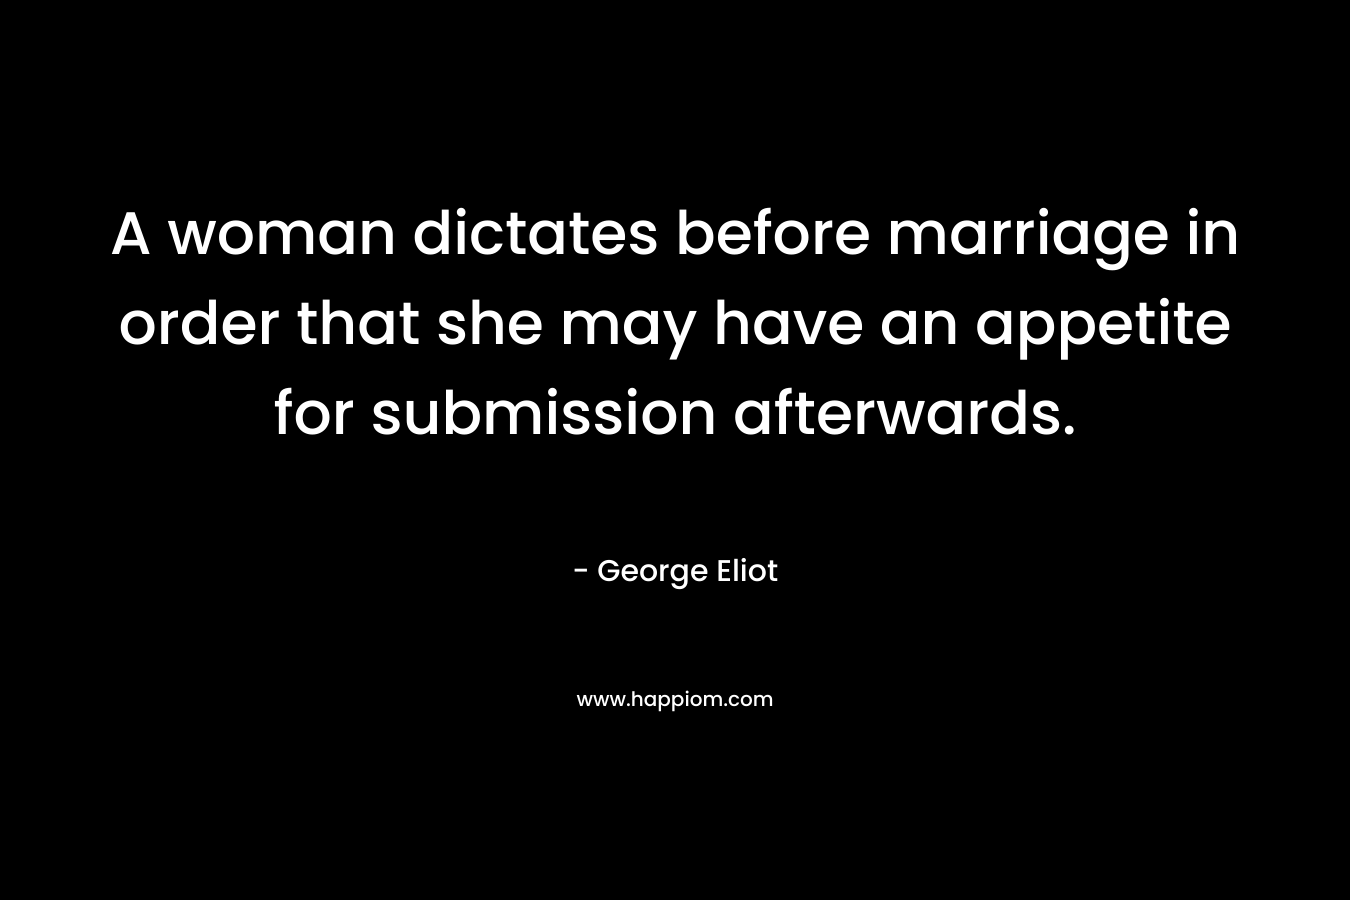 A woman dictates before marriage in order that she may have an appetite for submission afterwards.